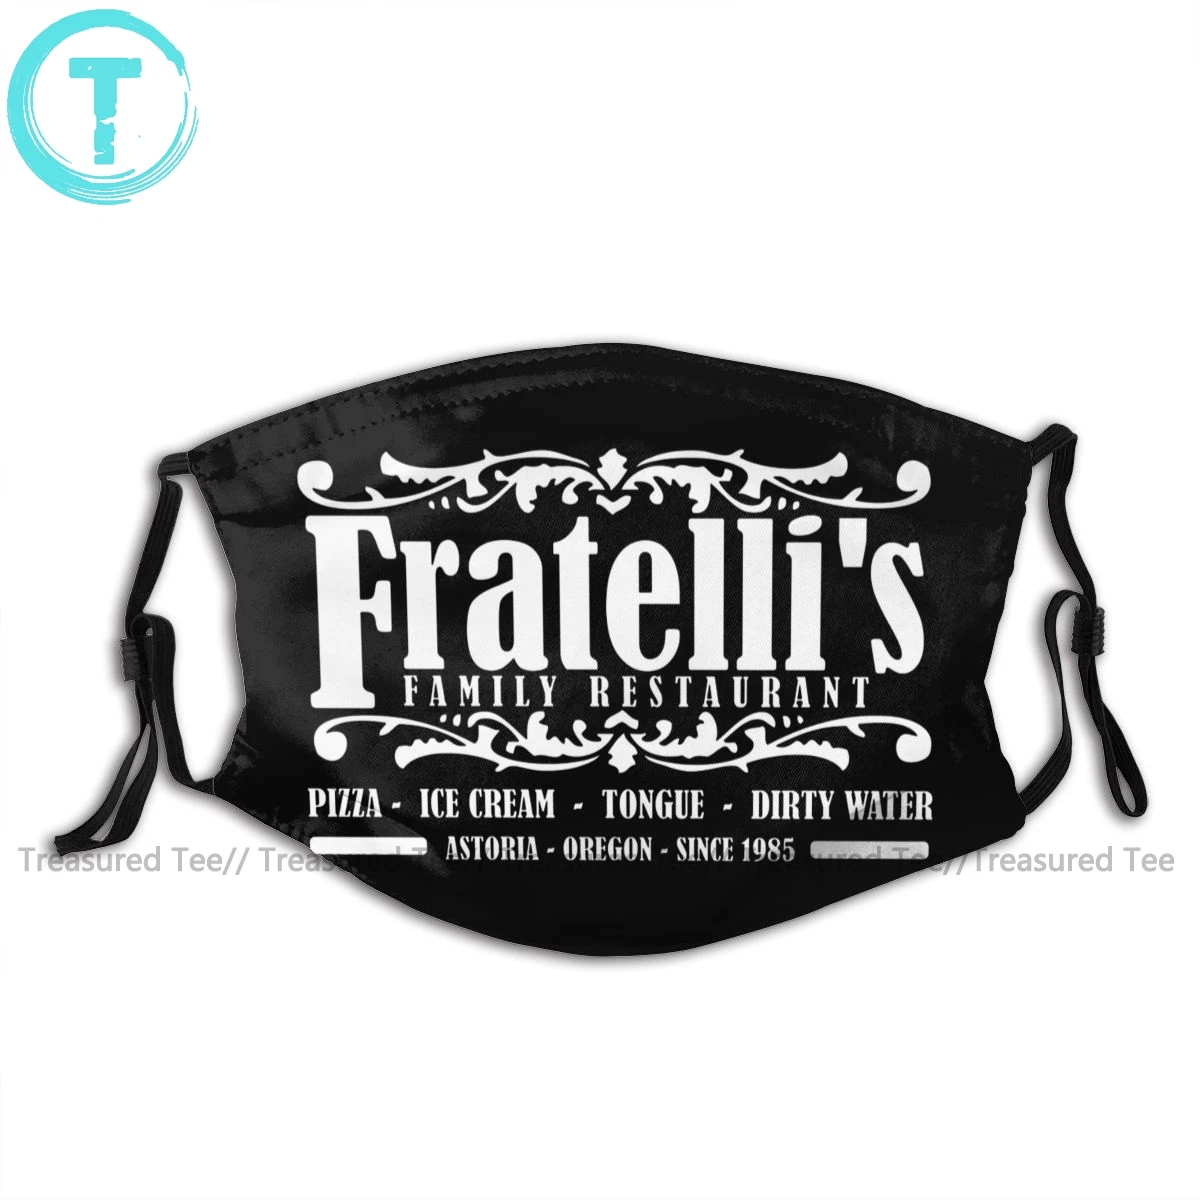 

Goonies Mouth Face Mask Fratelli S Family Restaurant Astoria Oregon Facial Mask Funny Fashion with 2 Filters for Adult